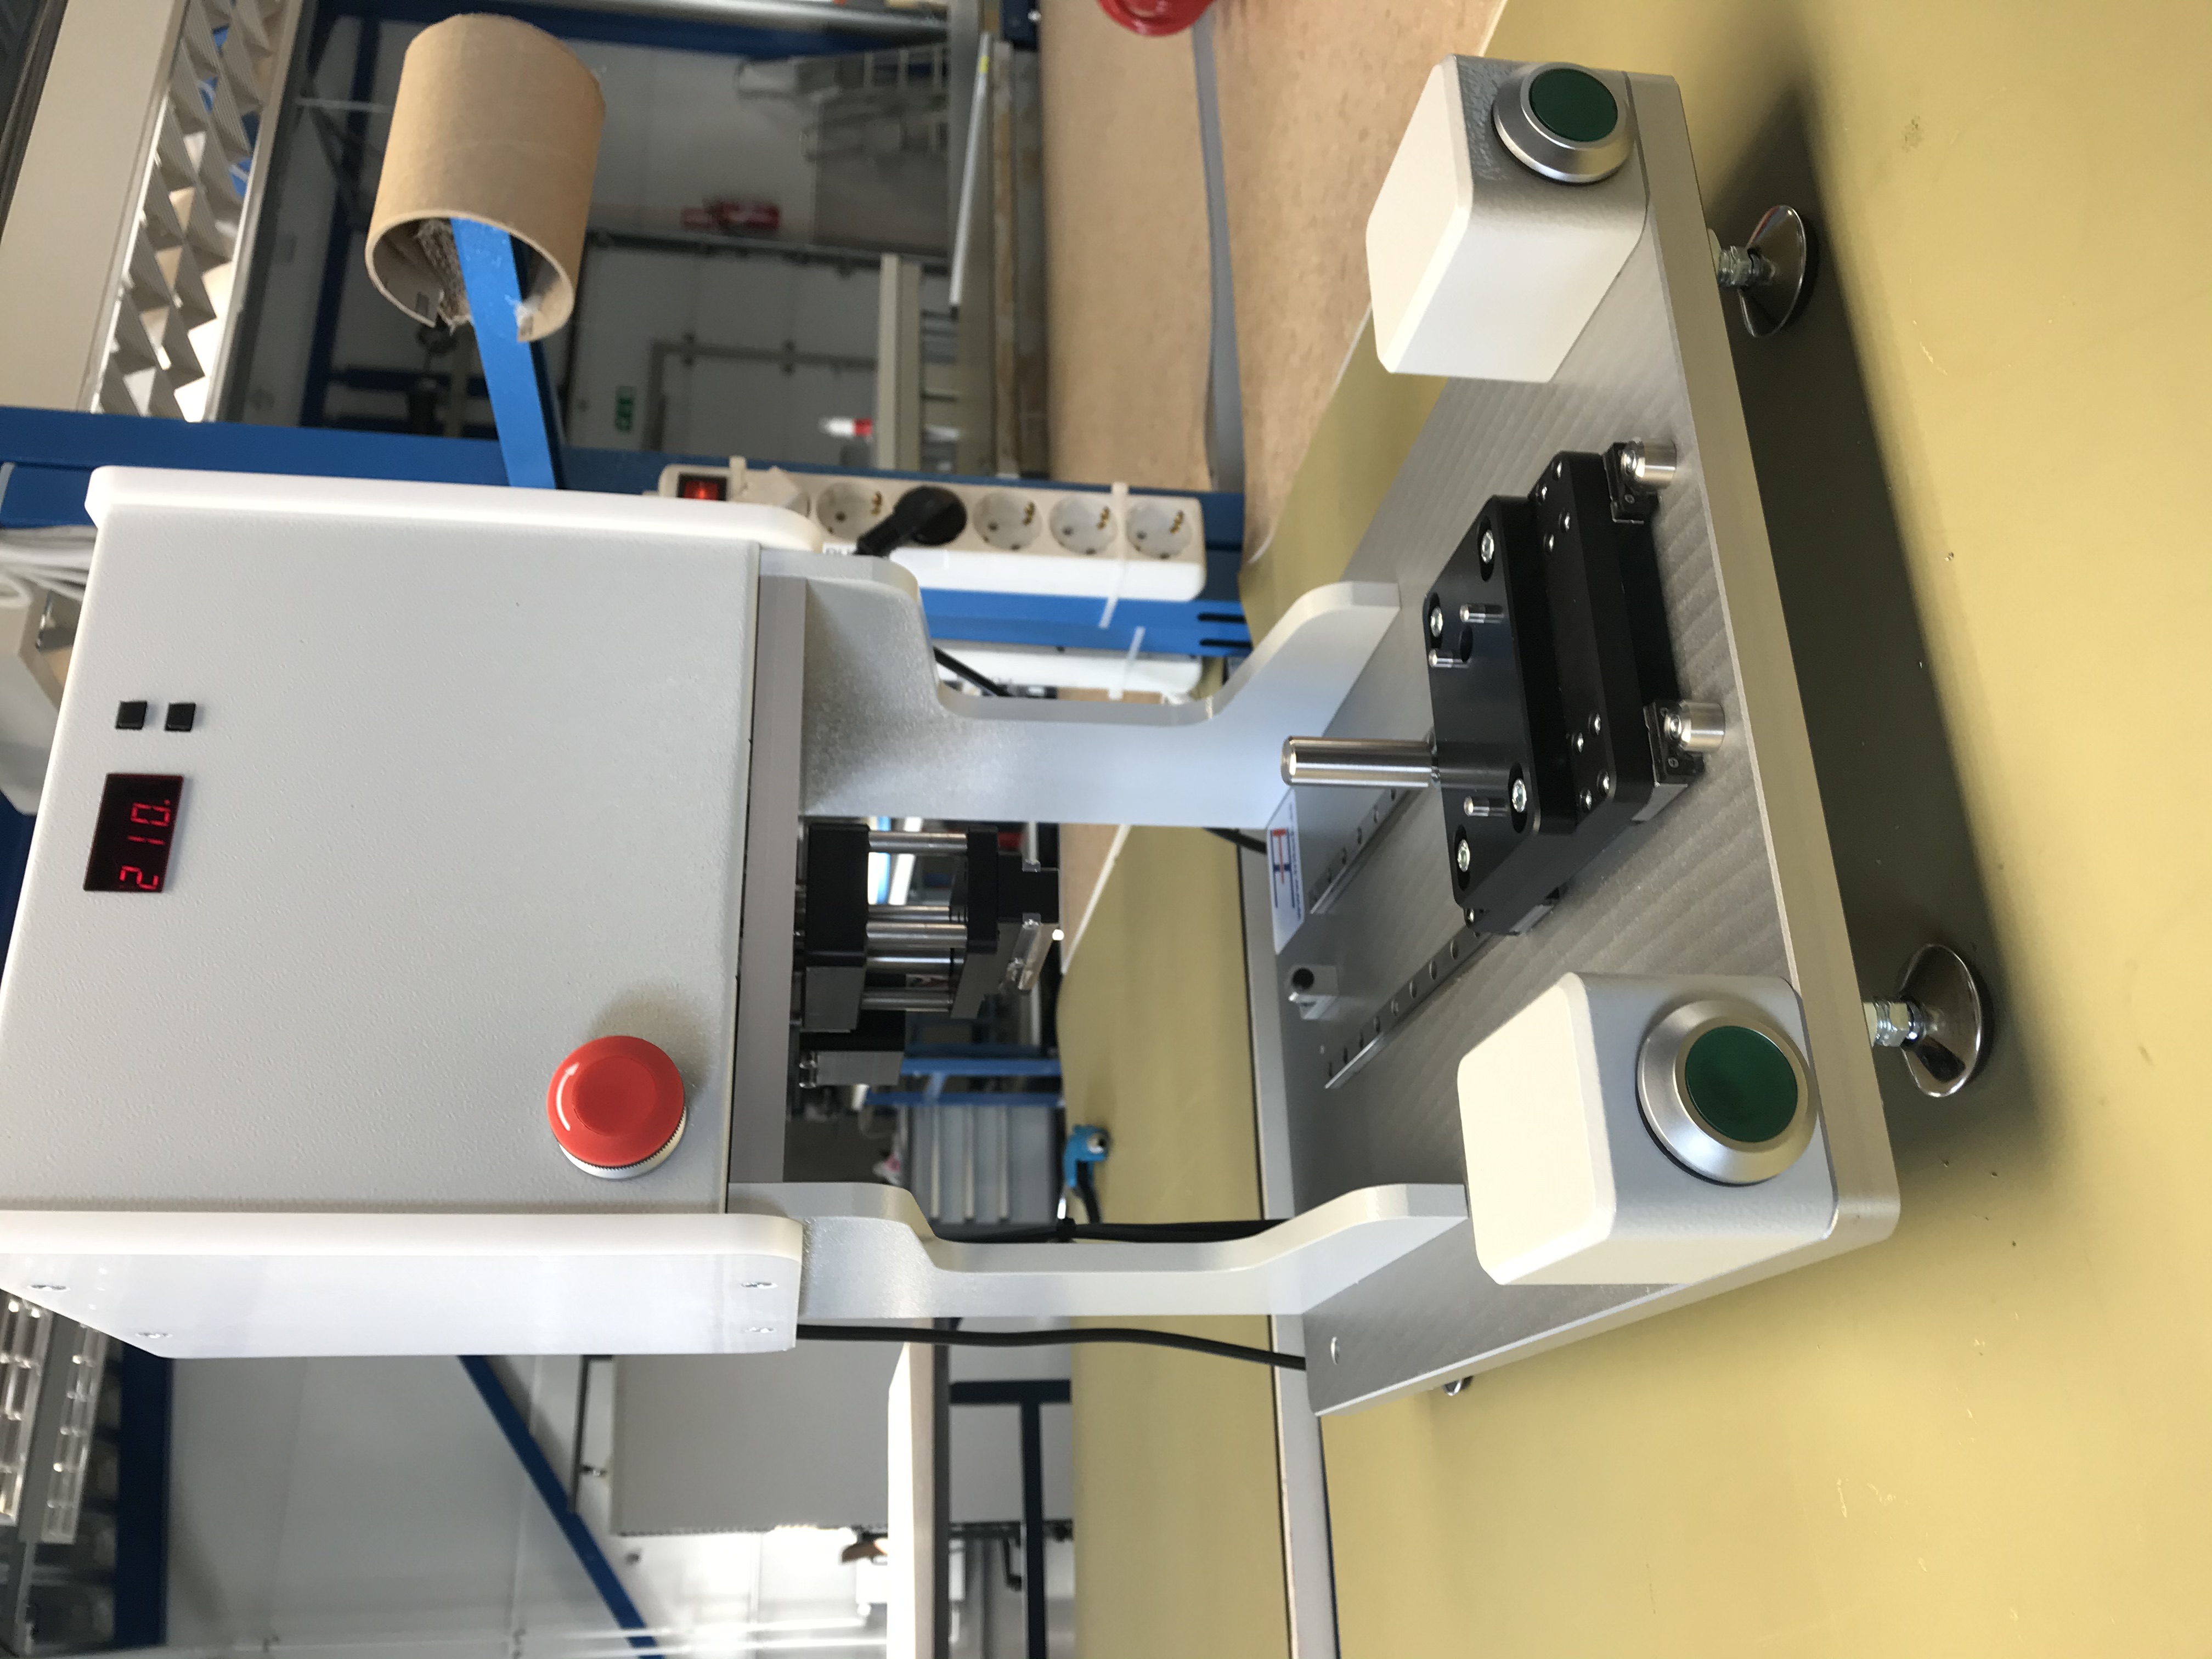 Machine for laminating small wires together in one bunch by means of special glued taped and high temperature.